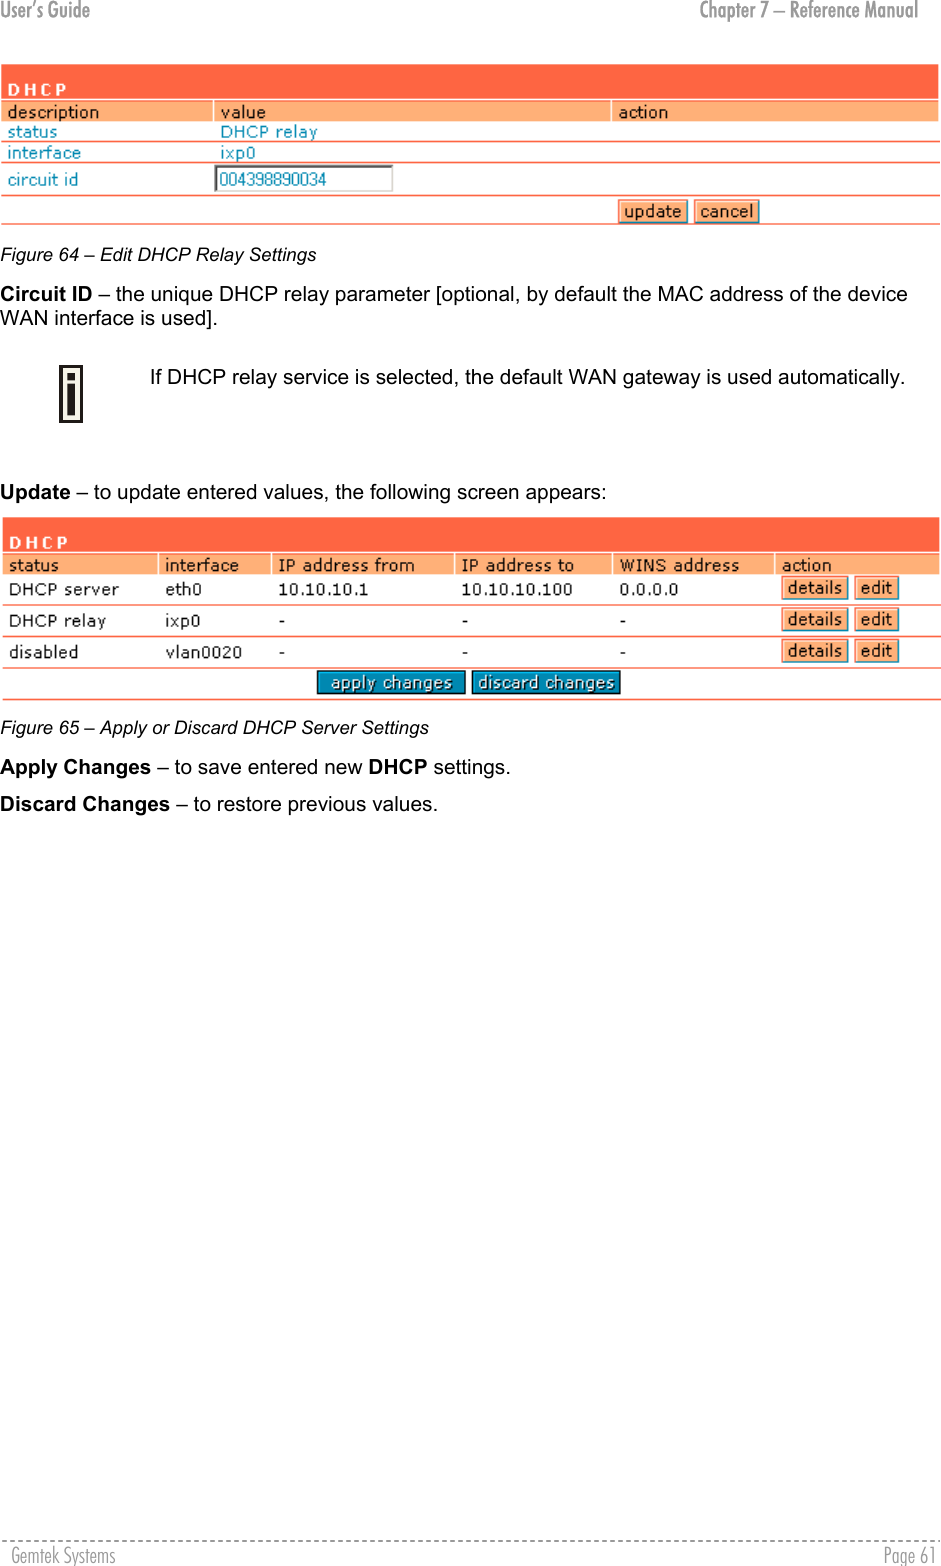 User’s Guide  Chapter 7 – Reference Manual  Figure 64 – Edit DHCP Relay Settings Circuit ID – the unique DHCP relay parameter [optional, by default the MAC address of the device WAN interface is used].  If DHCP relay service is selected, the default WAN gateway is used automatically.   Update – to update entered values, the following screen appears:  Figure 65 – Apply or Discard DHCP Server Settings Apply Changes – to save entered new DHCP settings. Discard Changes – to restore previous values. Gemtek Systems    Page 61  